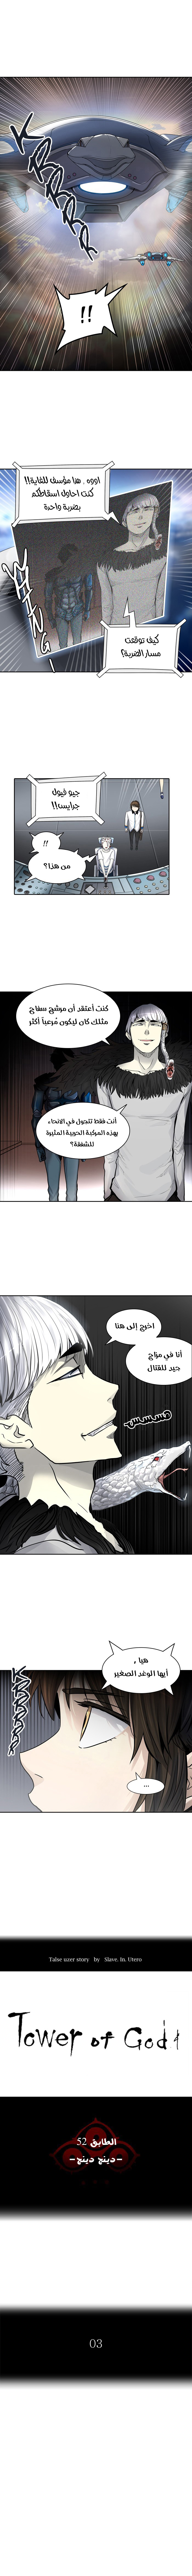 Tower of God S3: Chapter 4 - Page 1